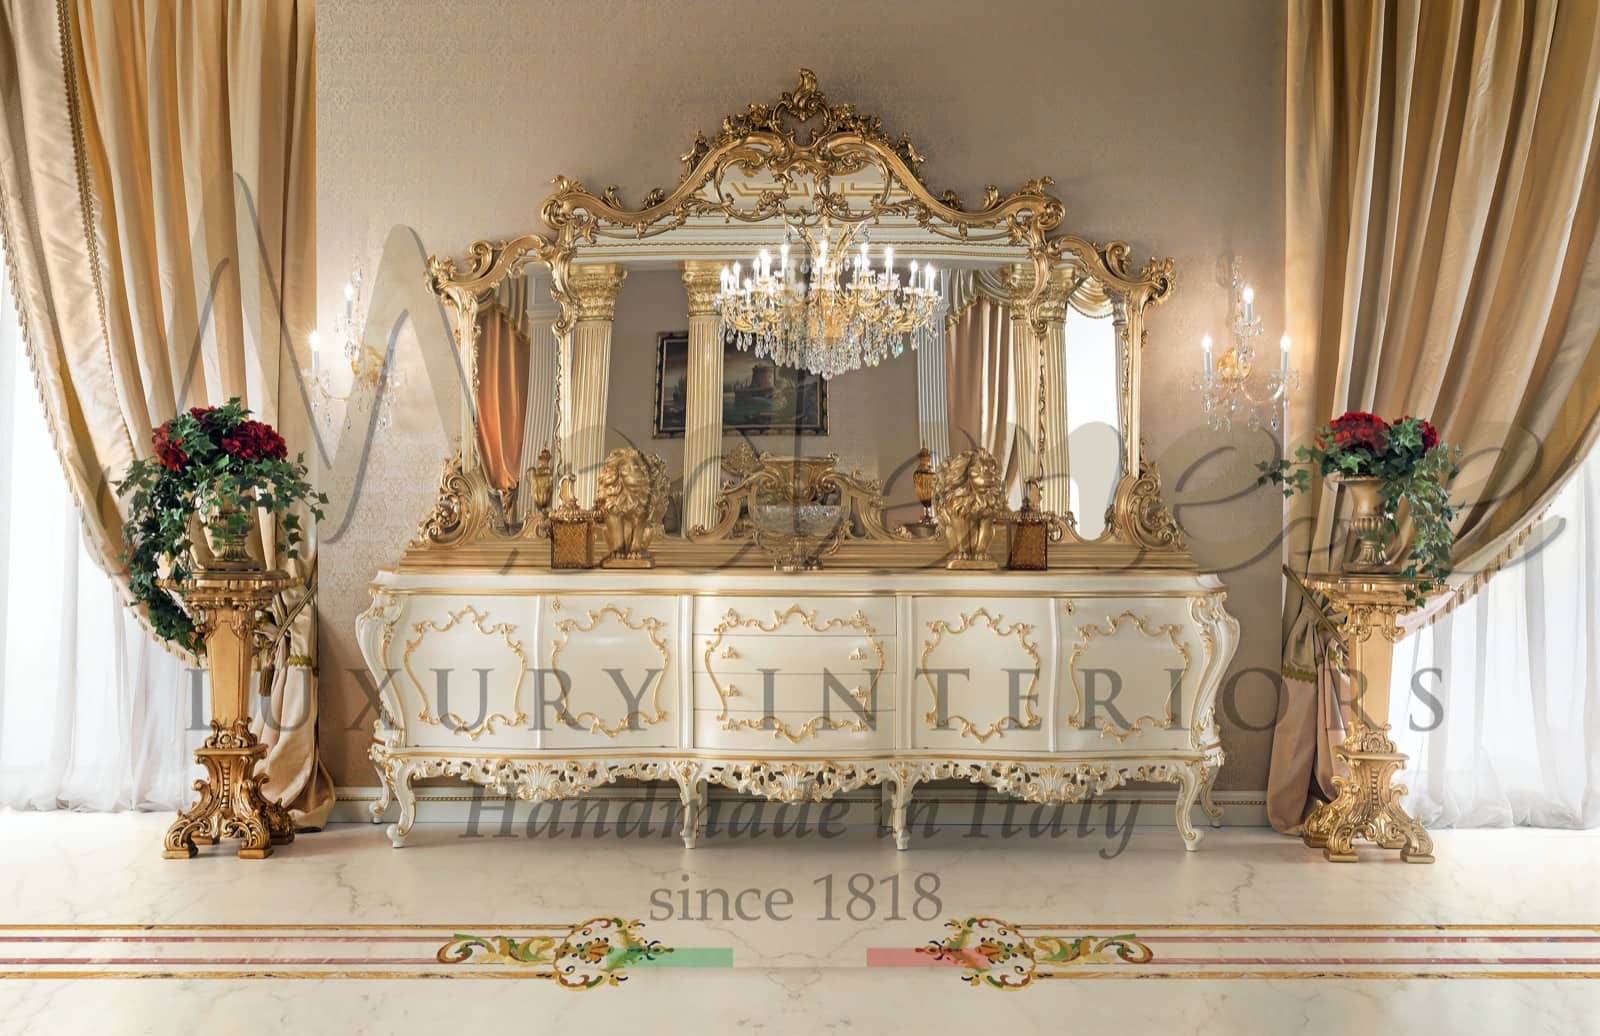 cabinet mirror gold leaf application gold details classic luxury furniture to decorate villa palace royal ideas baroque rococo style classy timeless design home entrance made in Italy customized interiors vase stand chandelier accessories décor decoration unique pieces